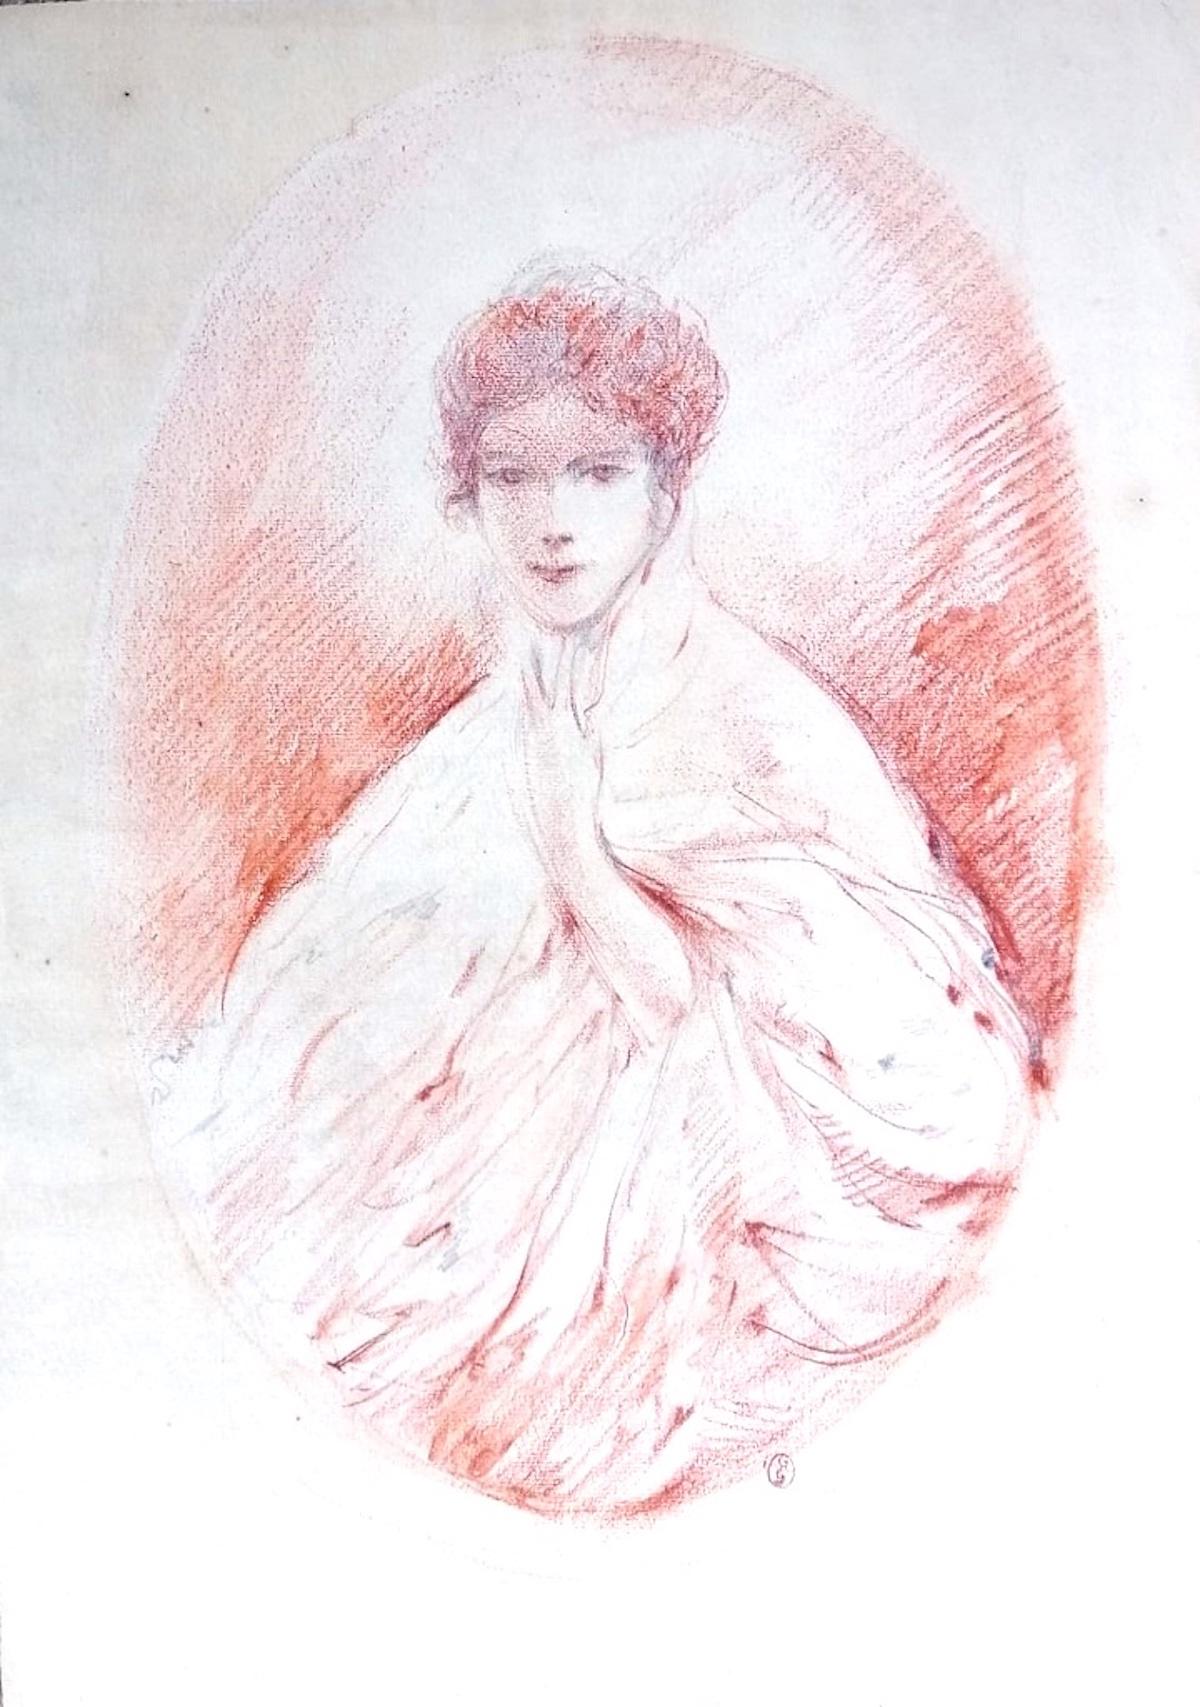 Unknown Portrait - Venus in Furs - Drawing on Paper - 1880s